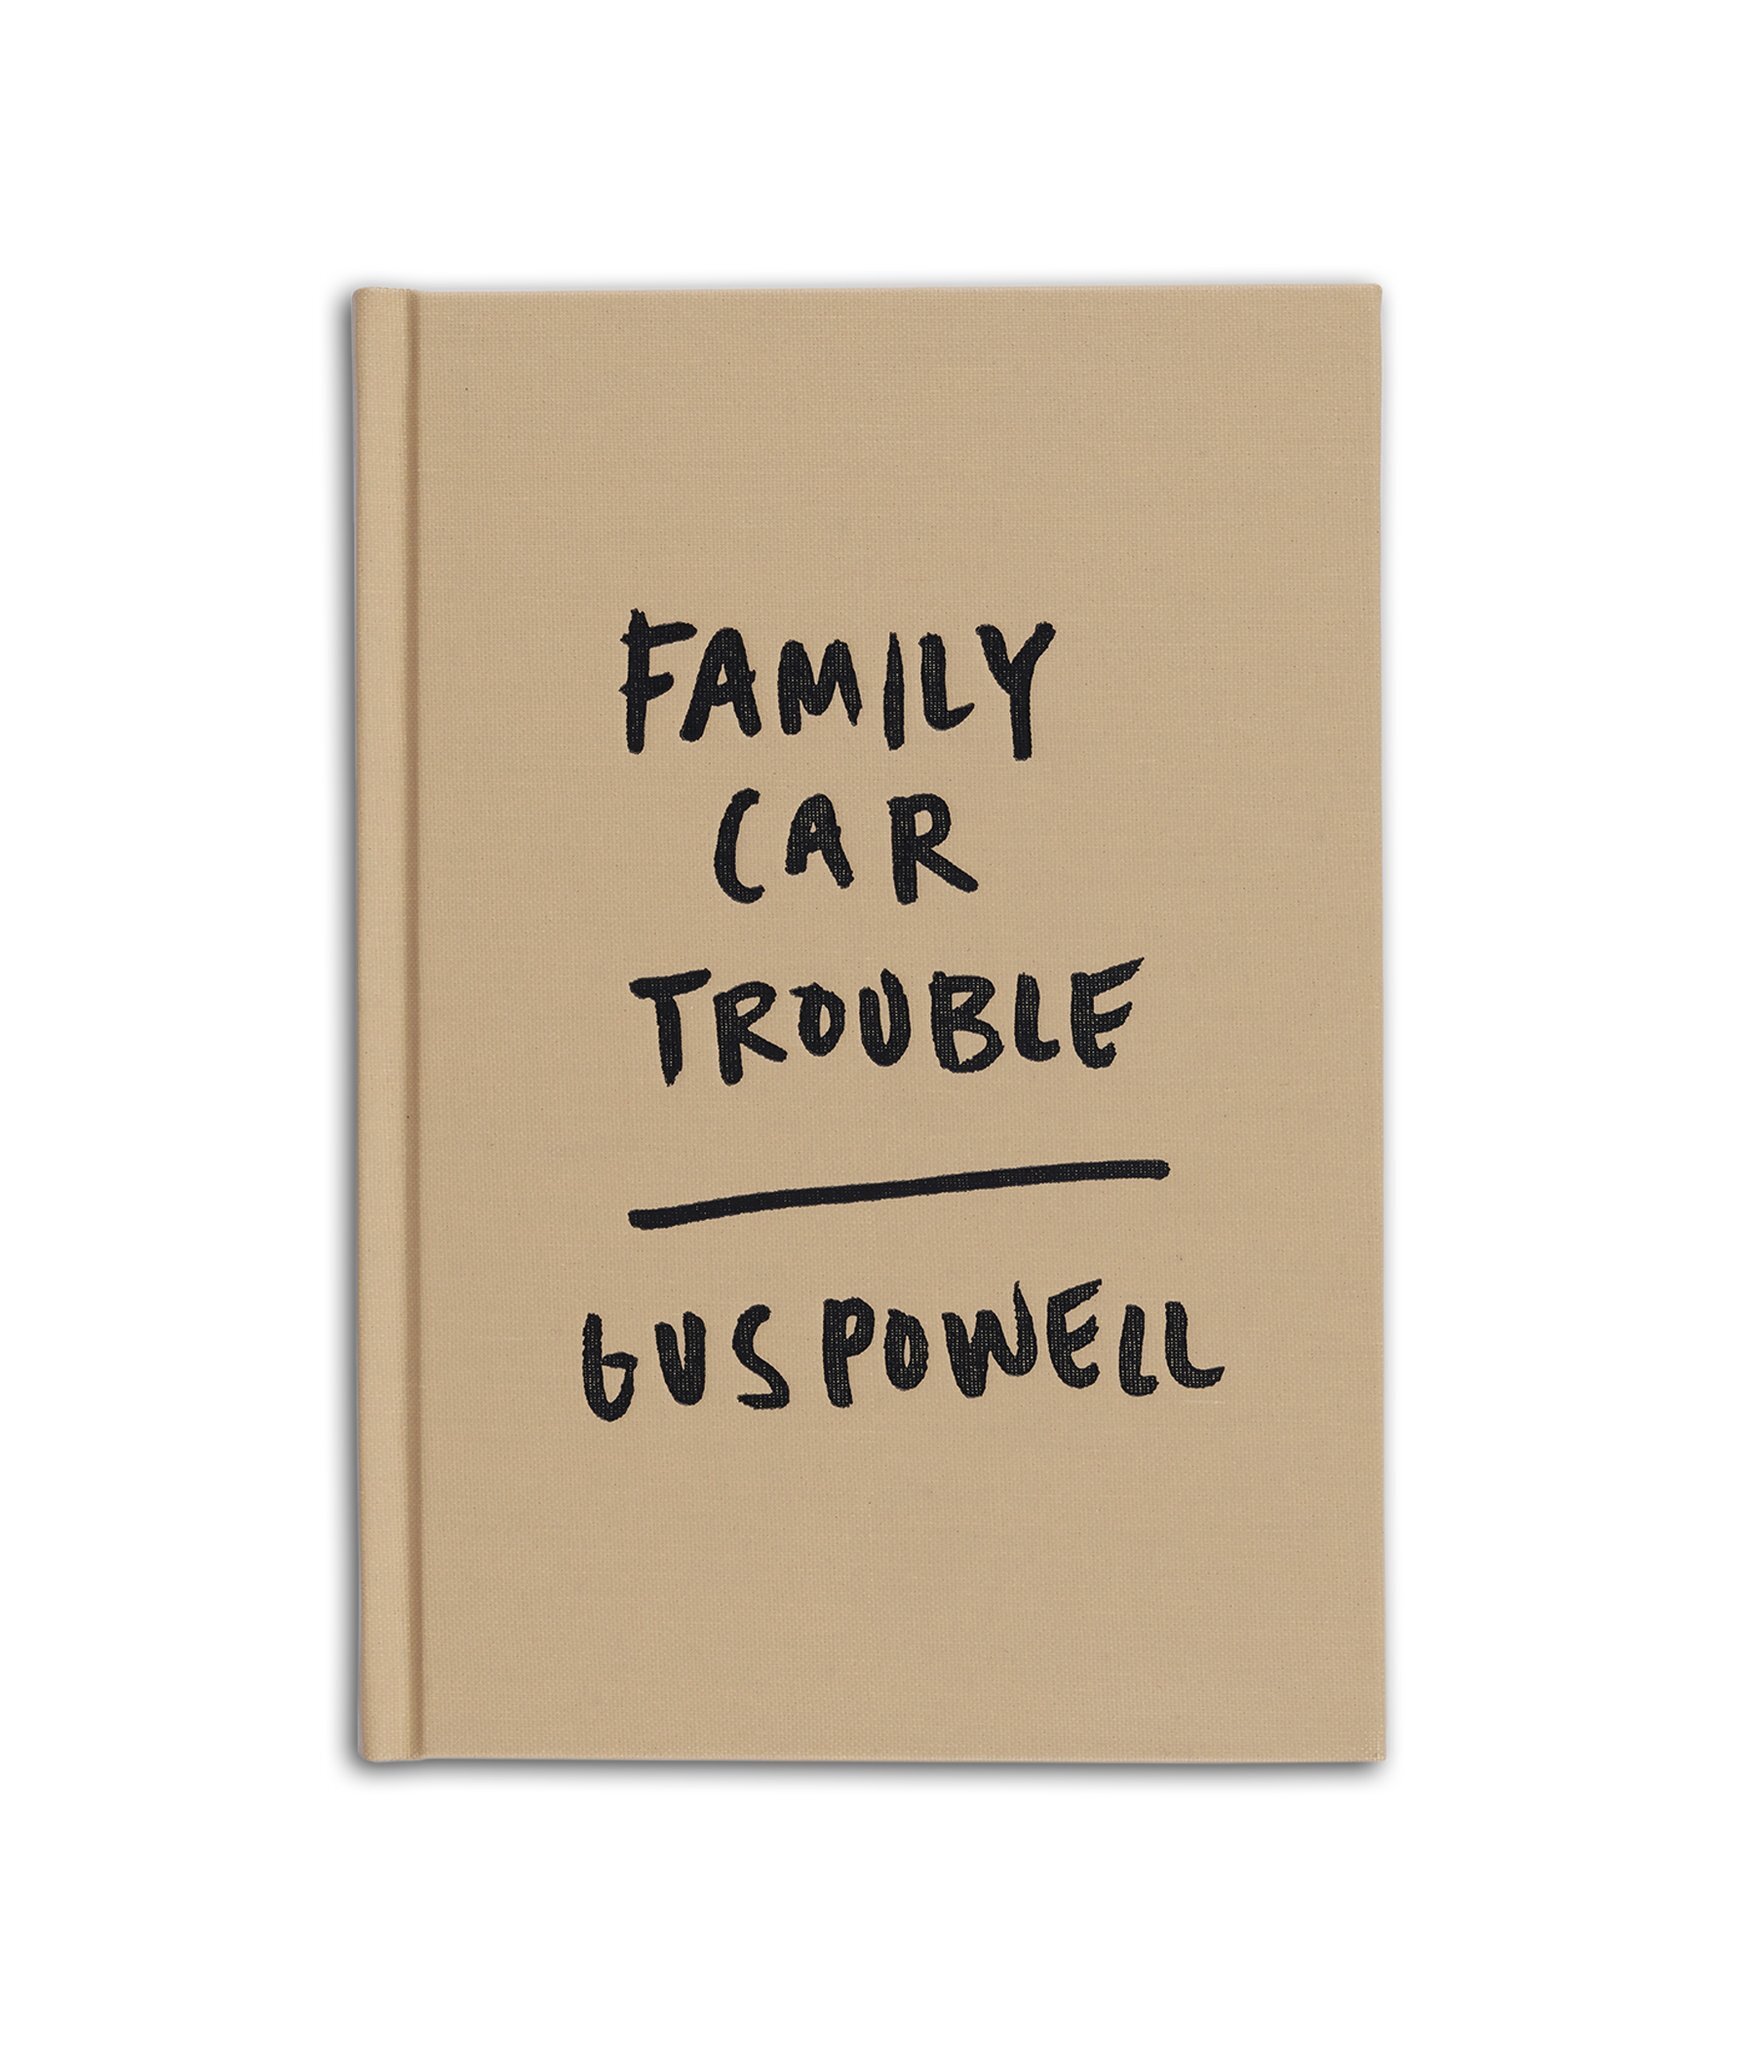 TBW-Books-Family-Car-Trouble-Gus-Powell-Cover-Front-Mock-06_2048x2048.jpg